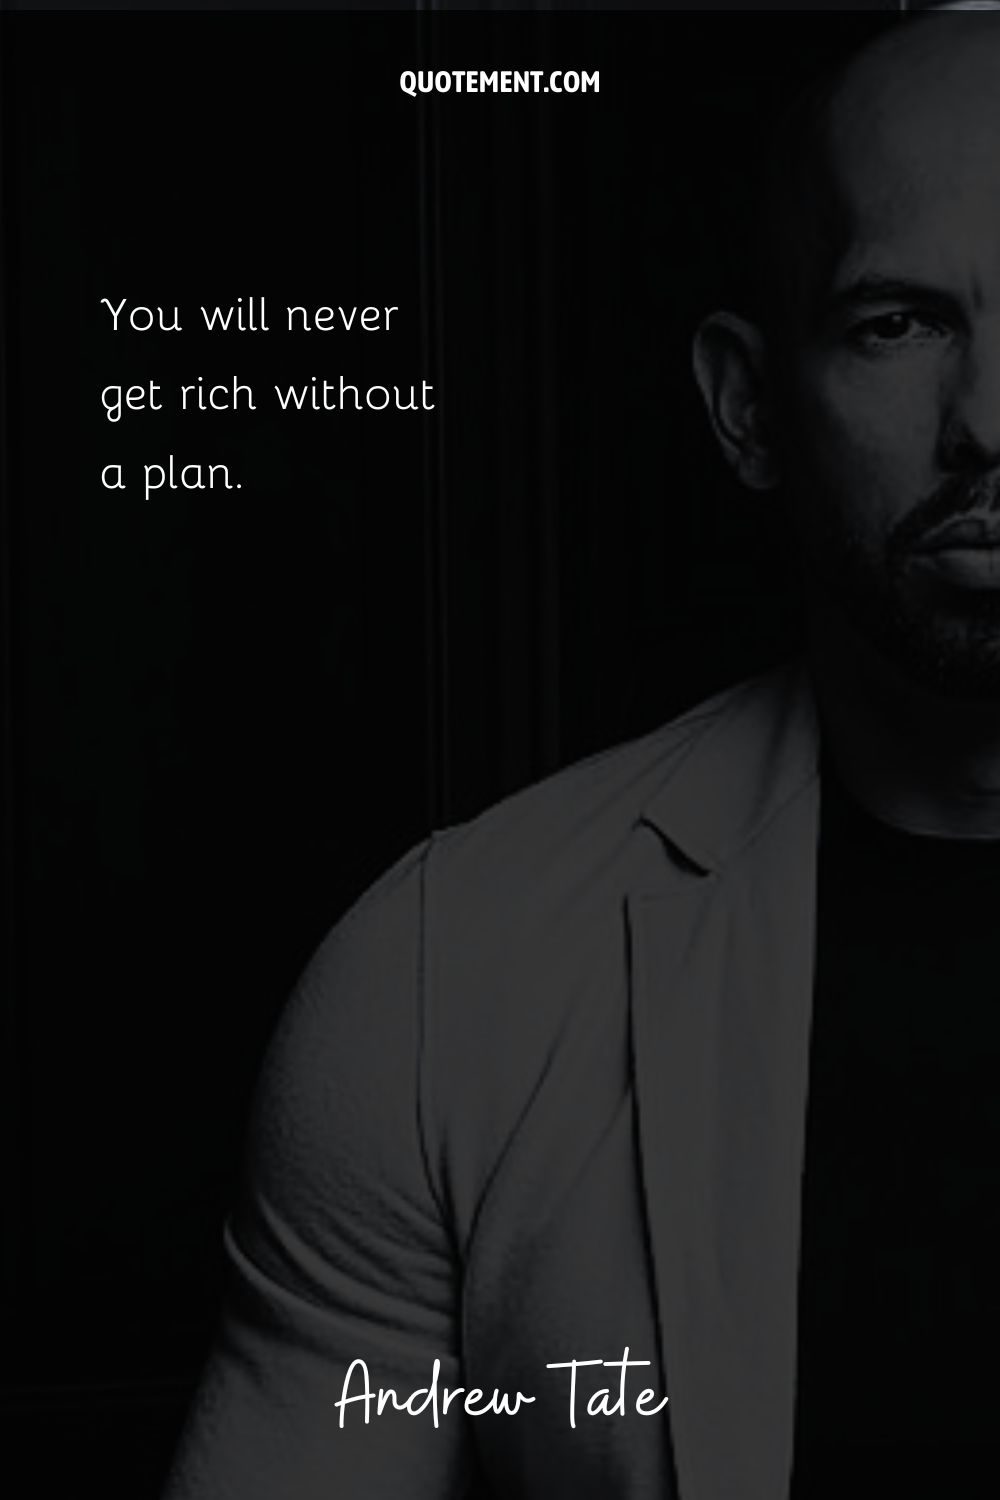 You will never get rich without a plan